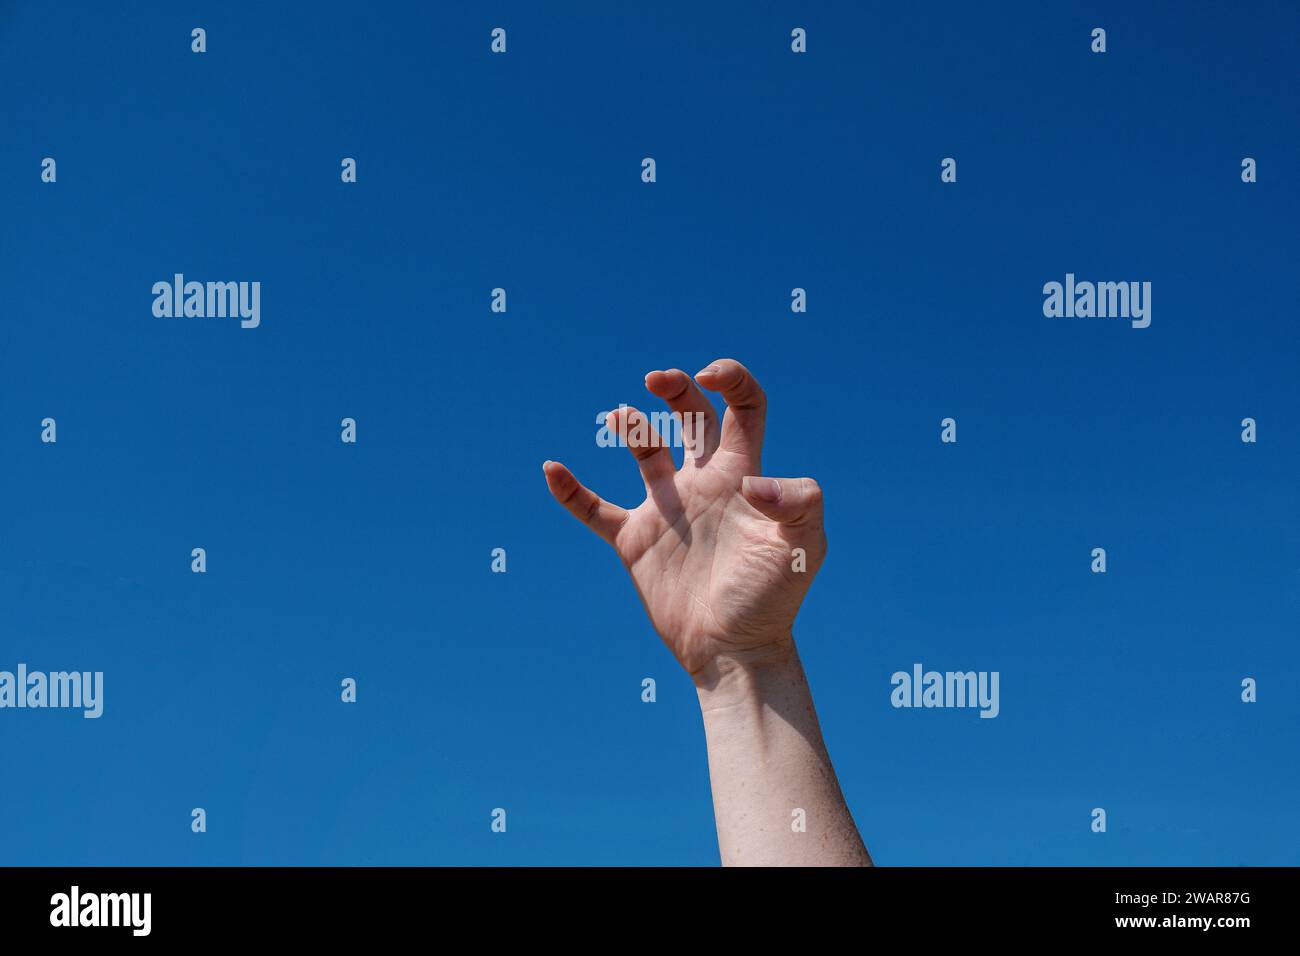 the hand shows the cat. The background is blue sky Stock Photo